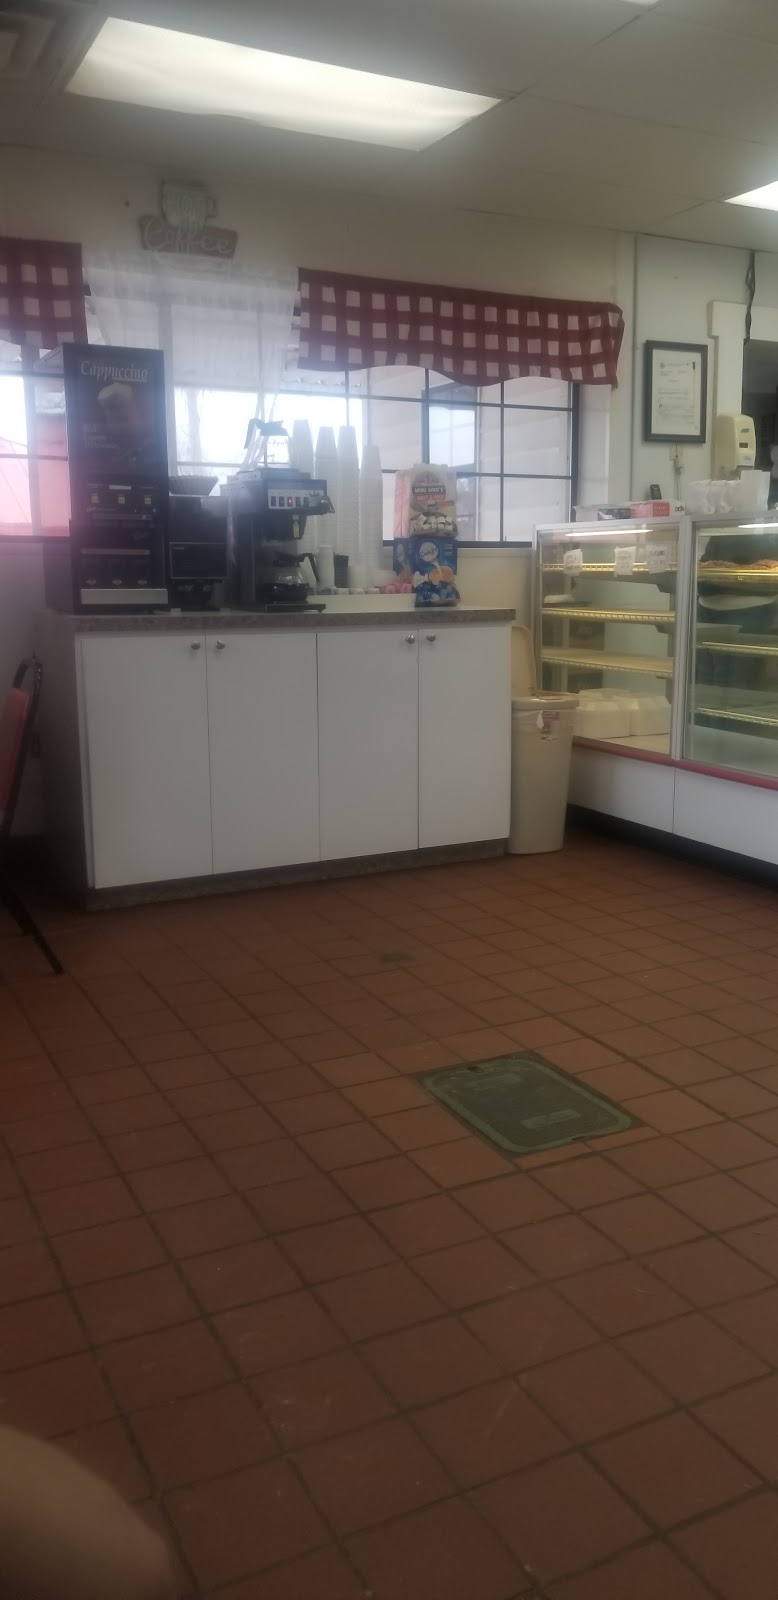 Donut Palace | 403 S Green Ave, Purcell, OK 73080 | Phone: (405) 527-5746